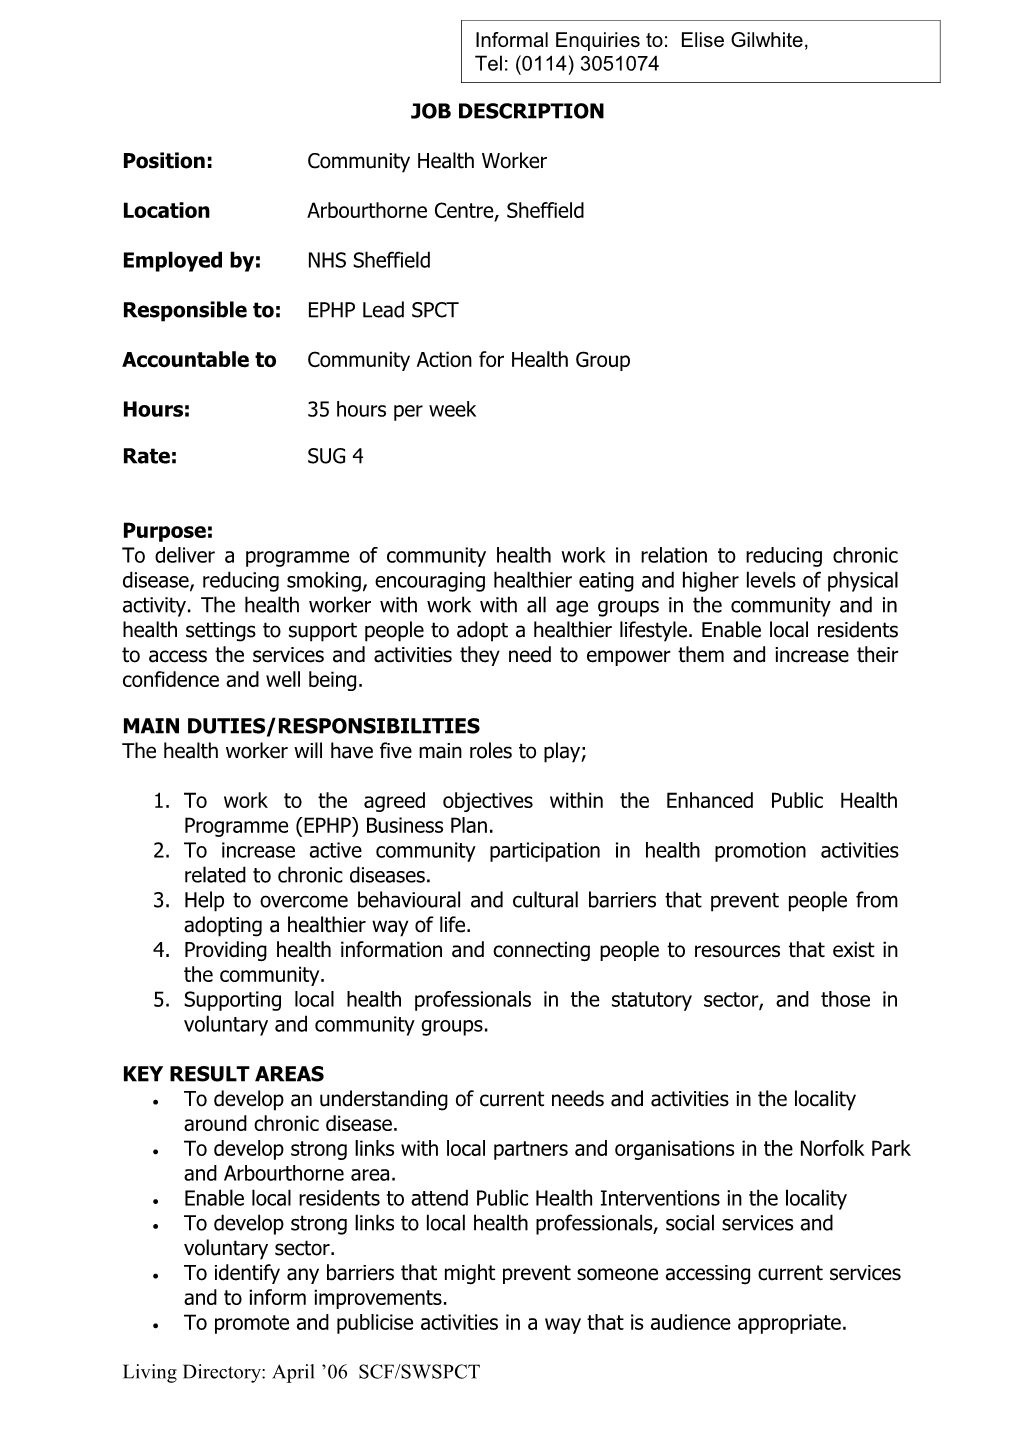 Position:Community Health Worker